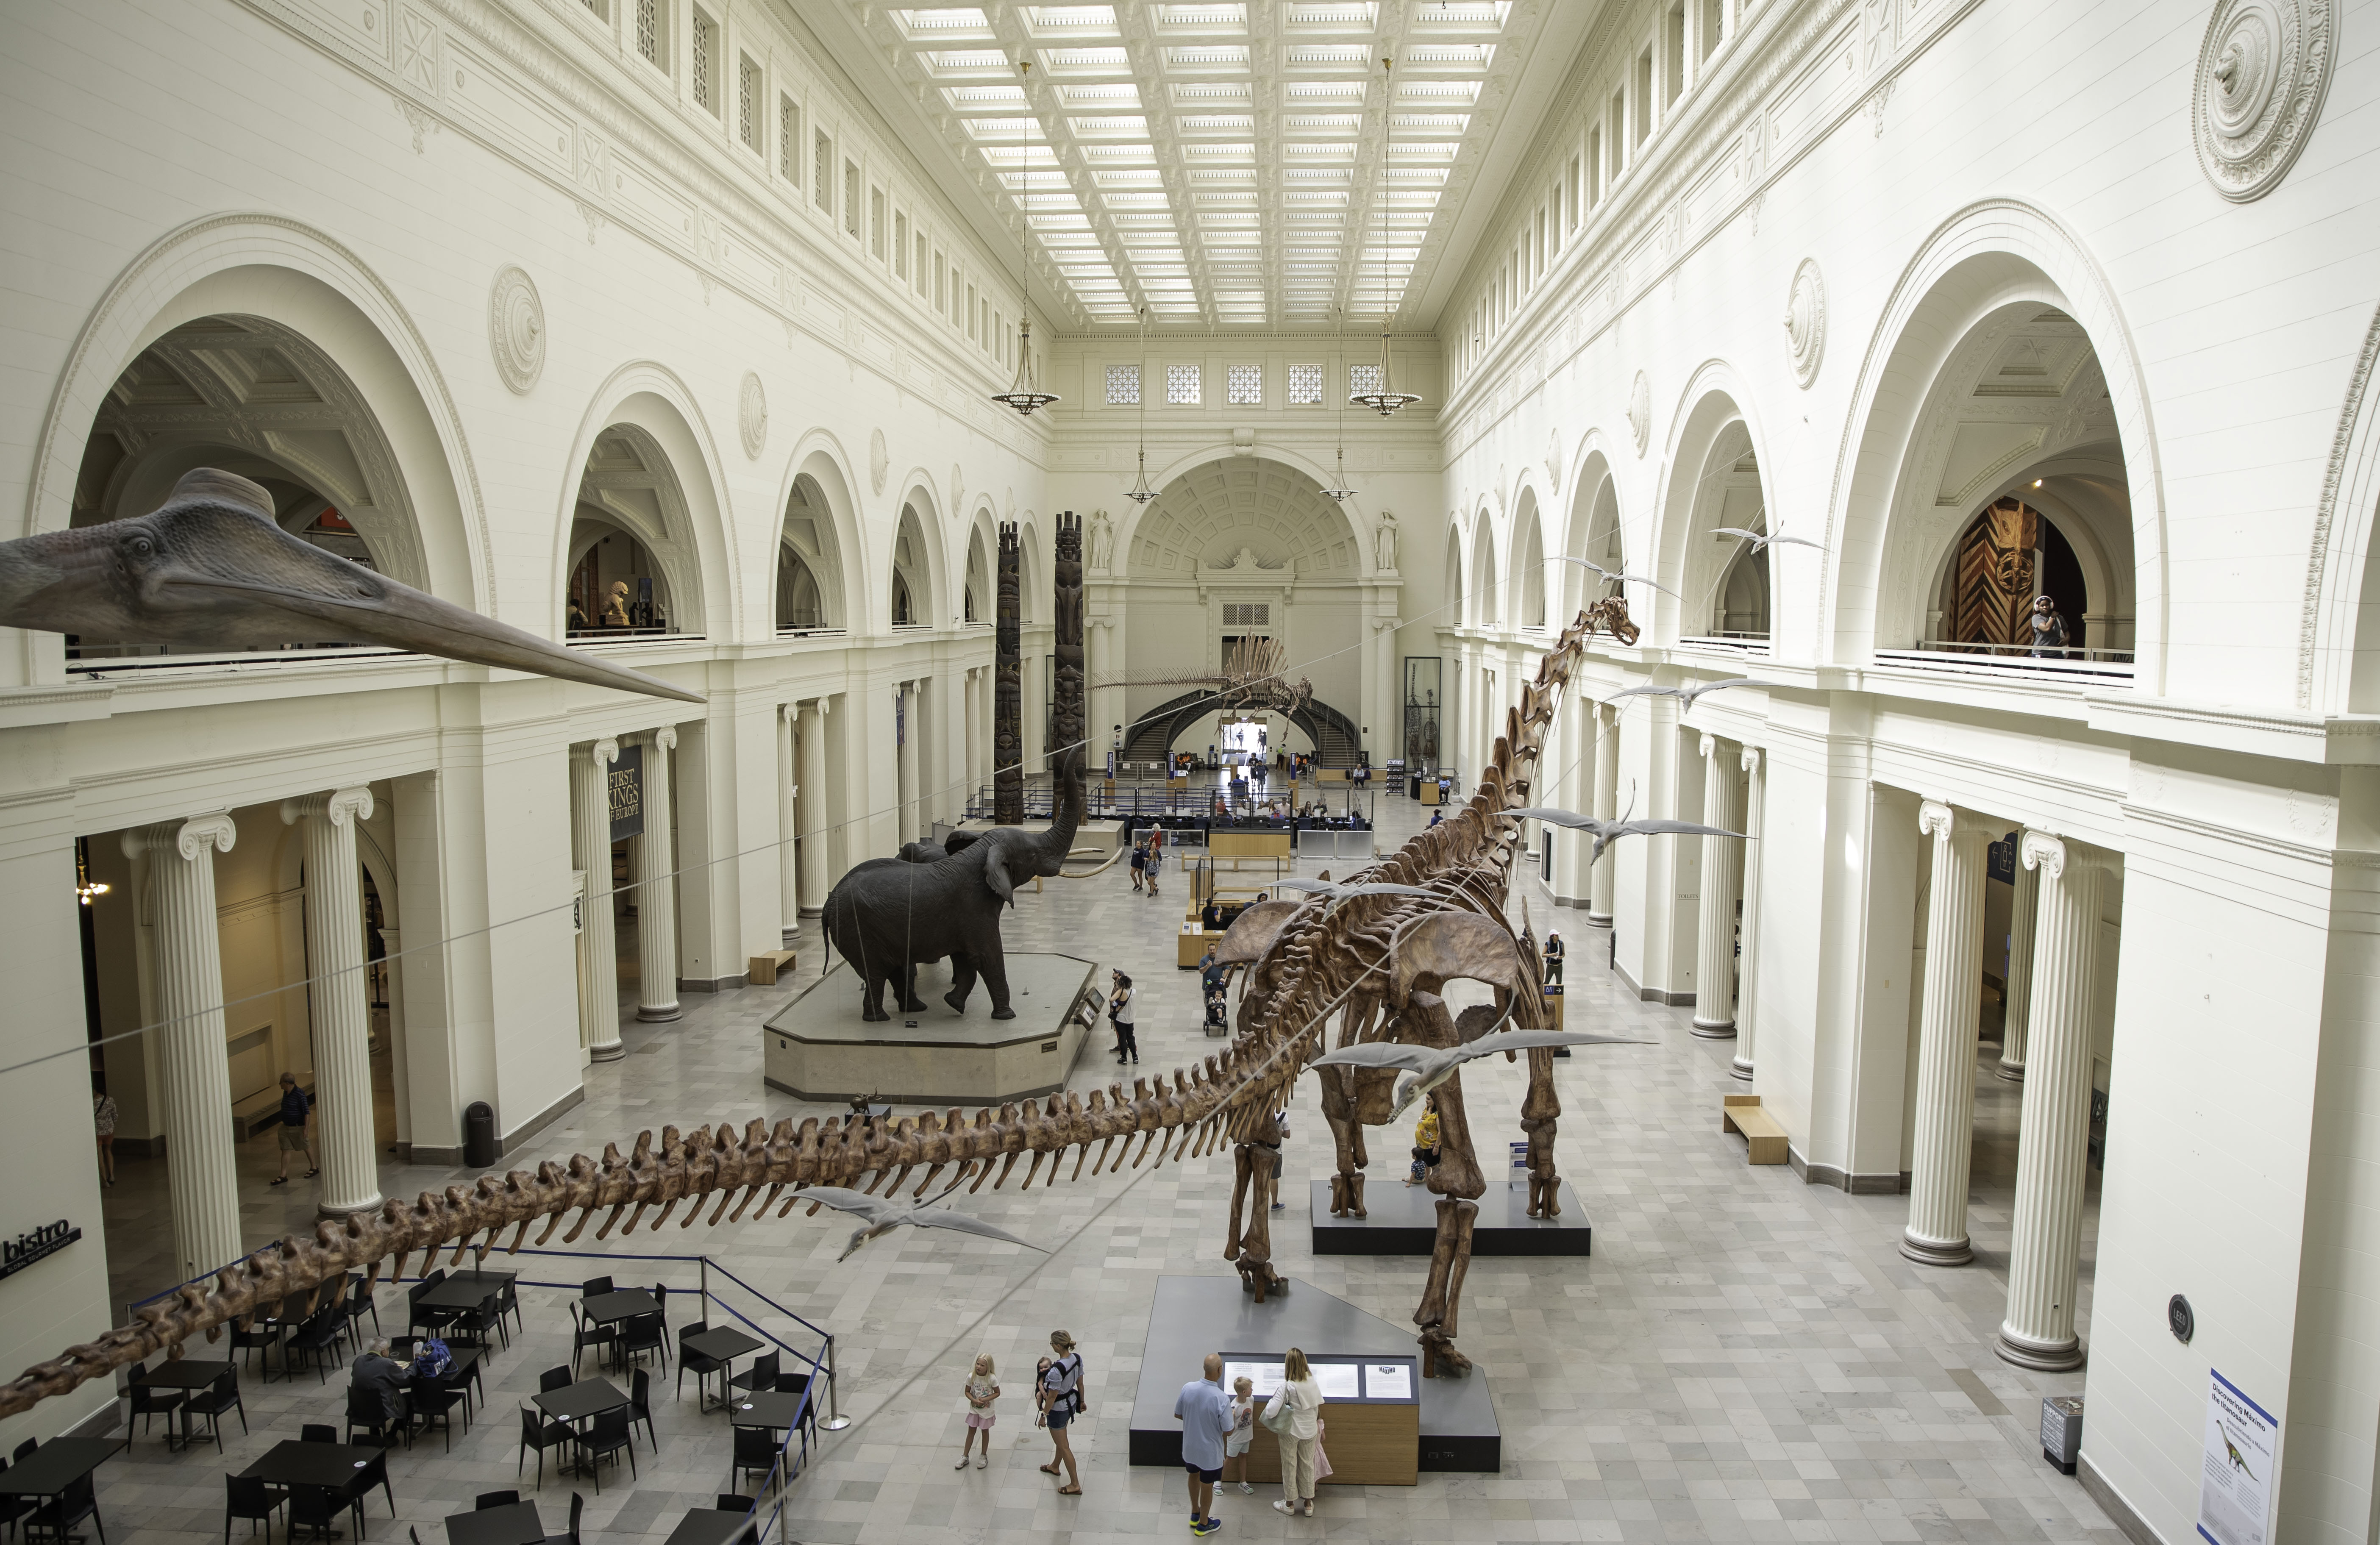 Looking from the upper level mezzanine at the museum's main hall. Visible are a large dinosaur fossil, taxidermied elephants and seating for the restaurant.